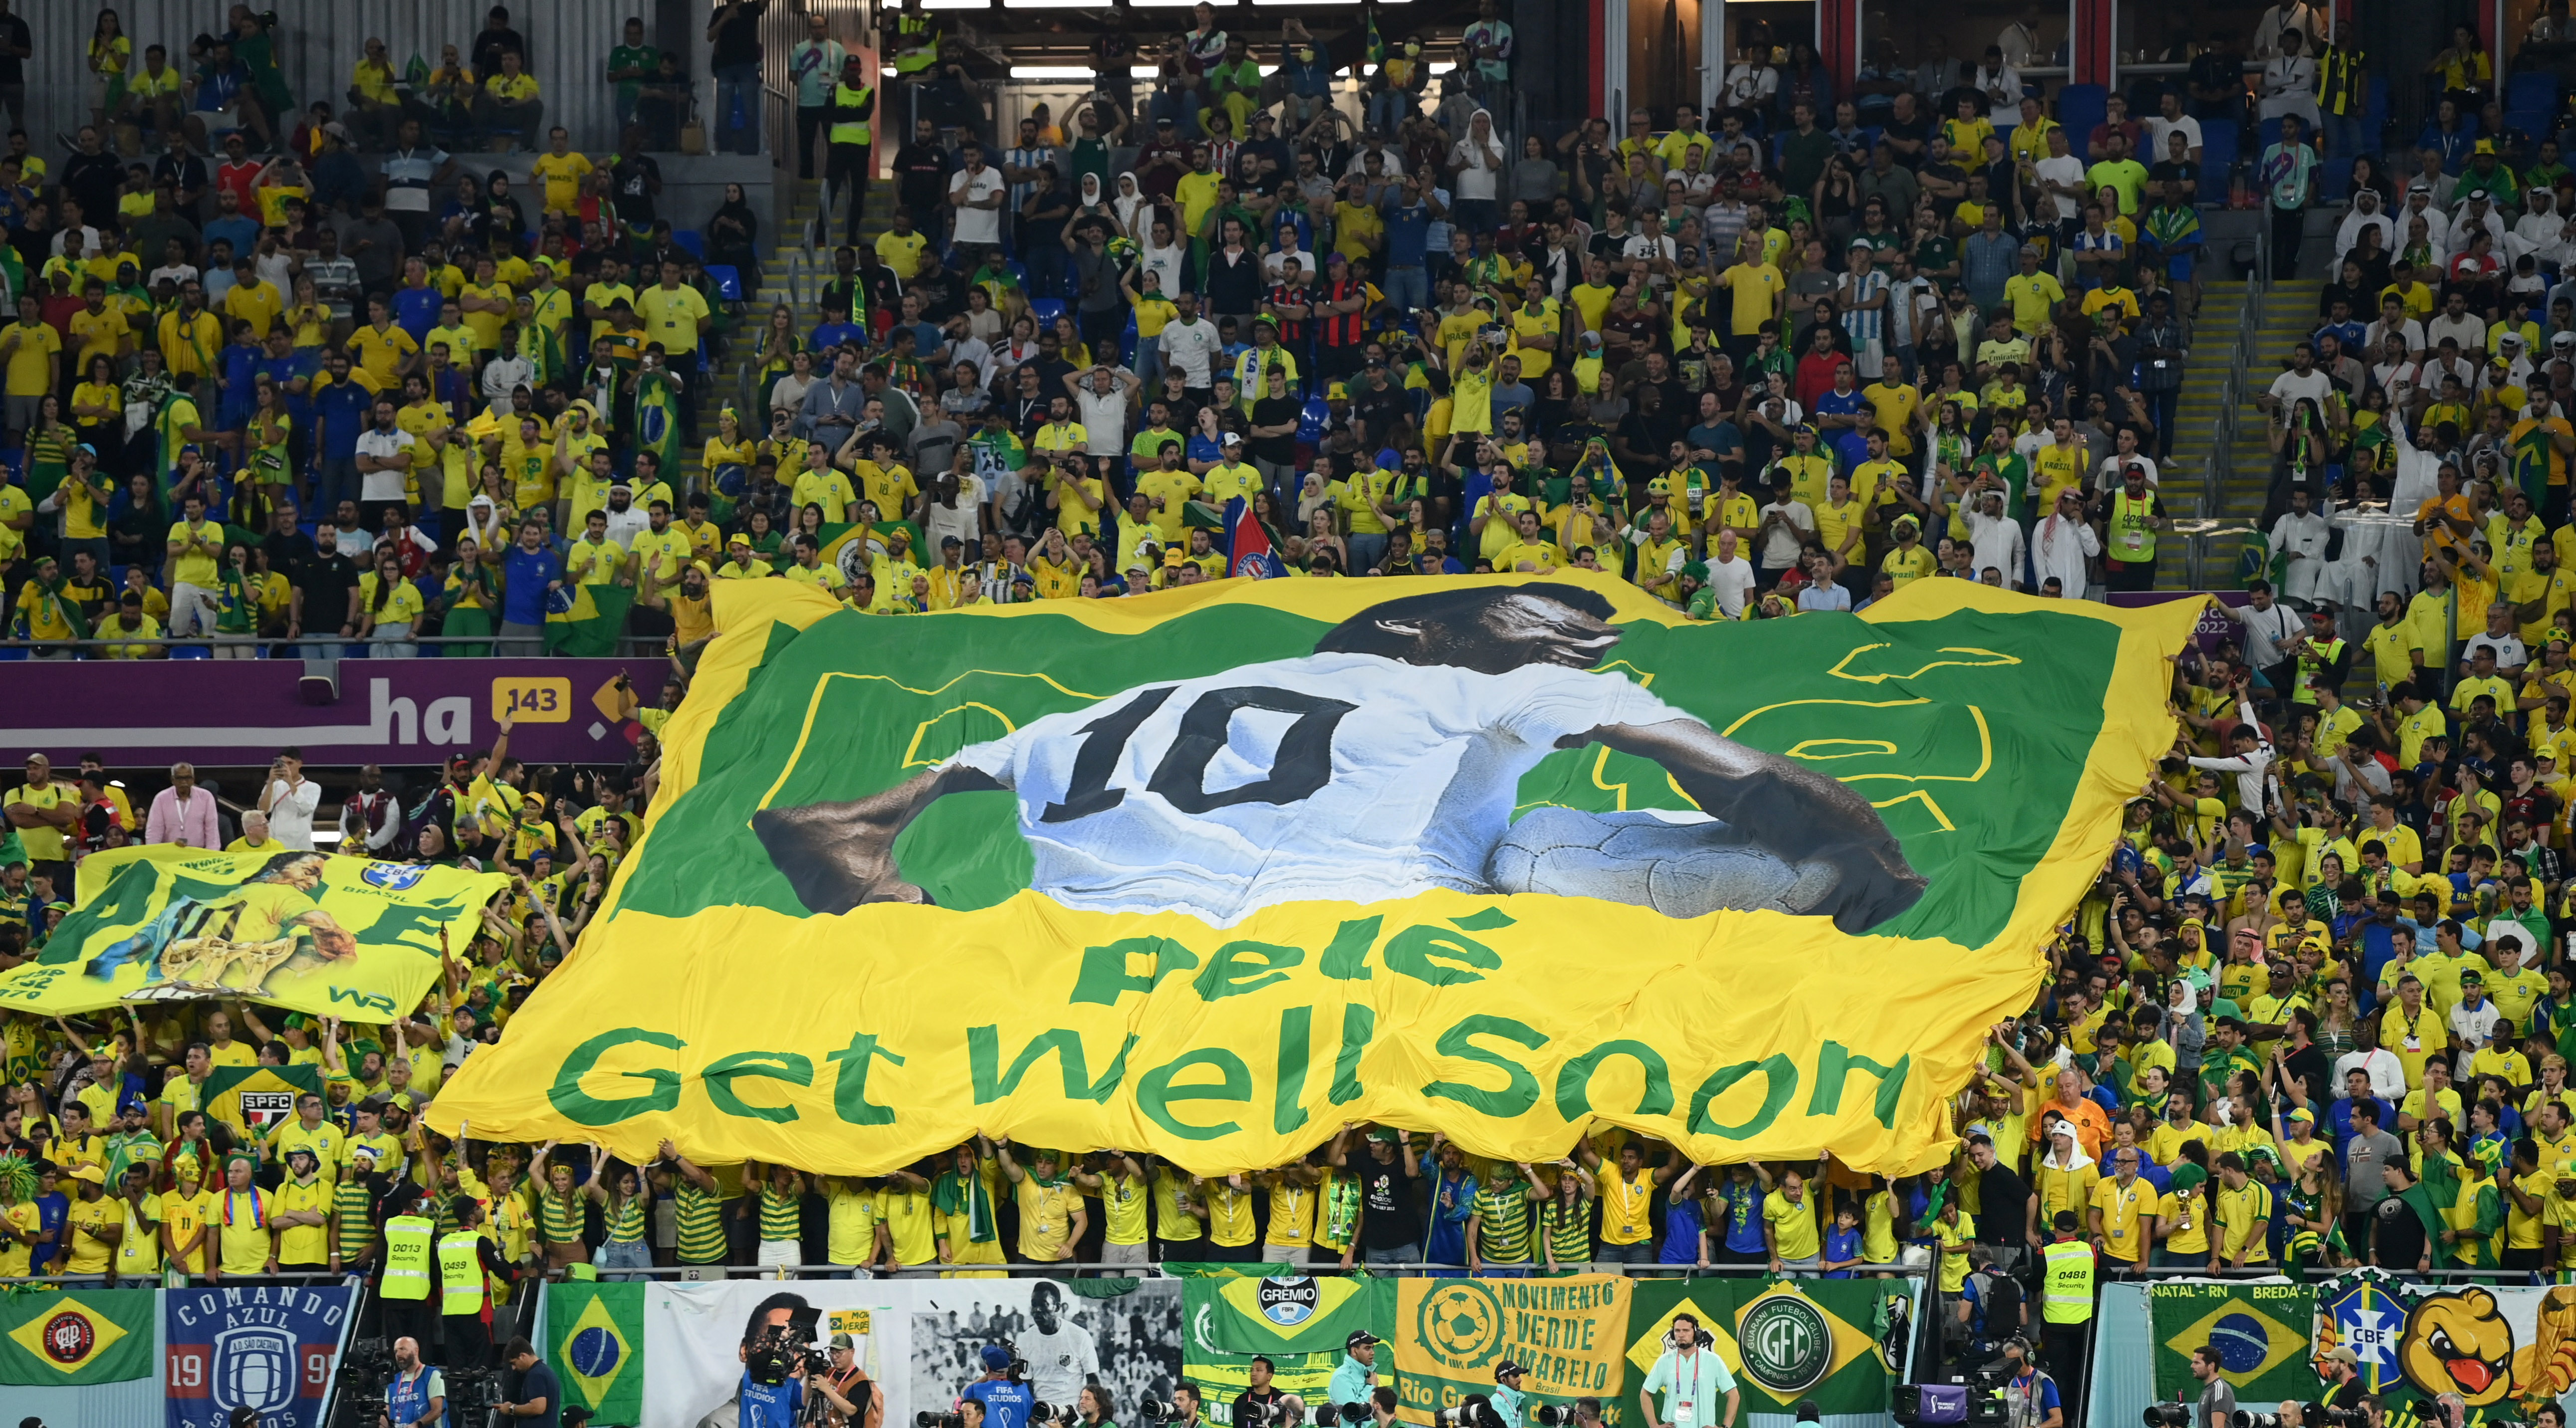 Soccer Football - FIFA World Cup Qatar 2022 - Round of 16 - Brazil v South Korea - Stadium 974, Doha, Qatar - December 5, 2022  Fans inside the stadium hold up a banner of former Brazil player Pele with the message get well soon REUTERS/Annegret Hilse